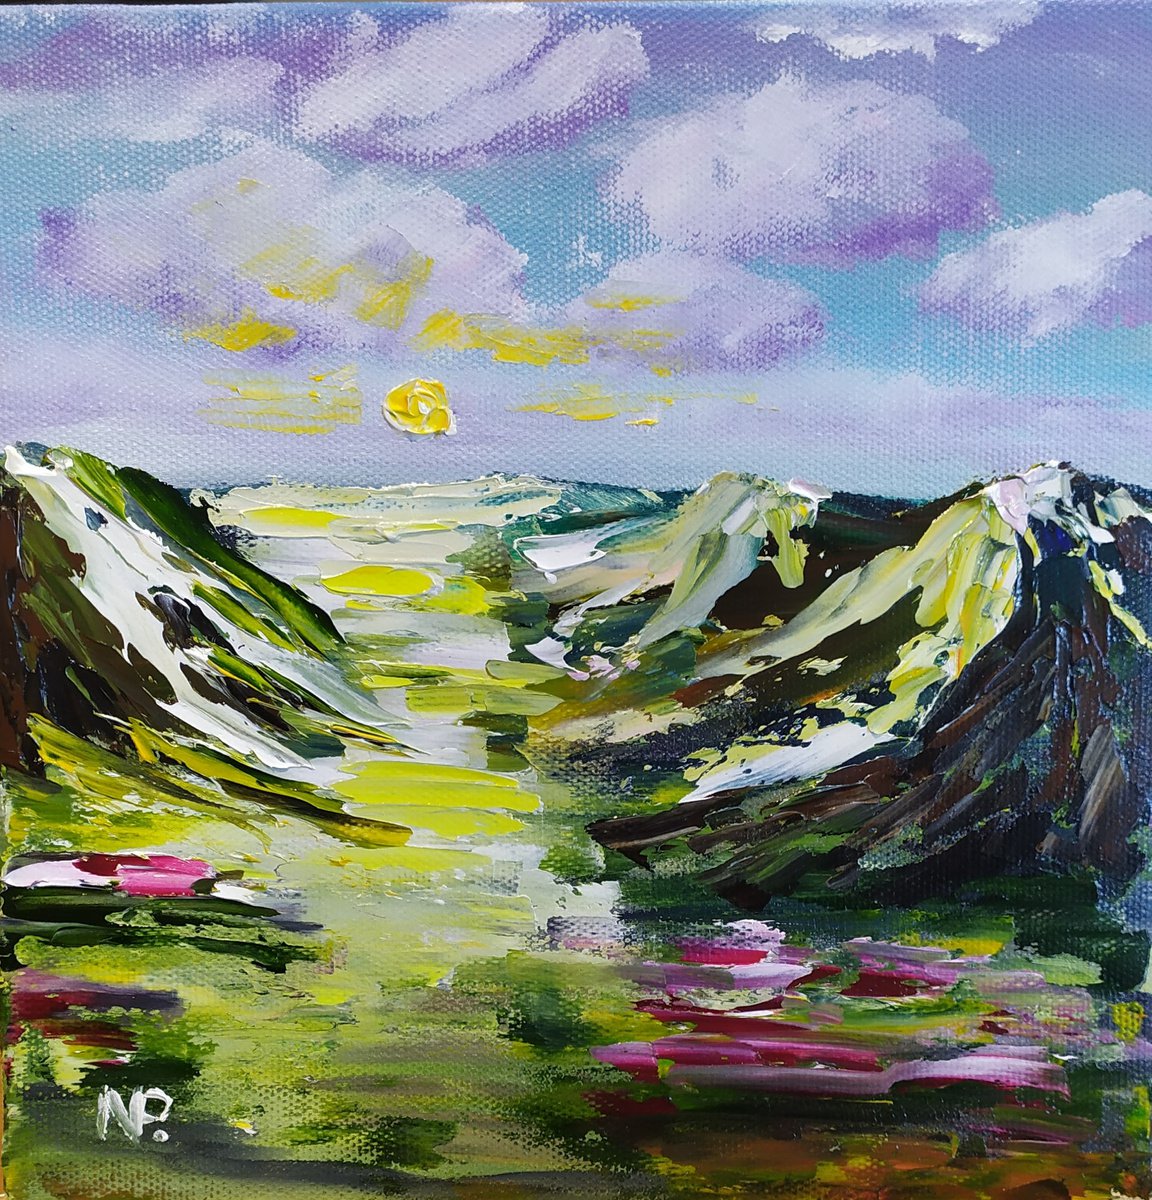 Beginning of the day, original landscape, mountains, sun oil painting, Gift by Nataliia Plakhotnyk